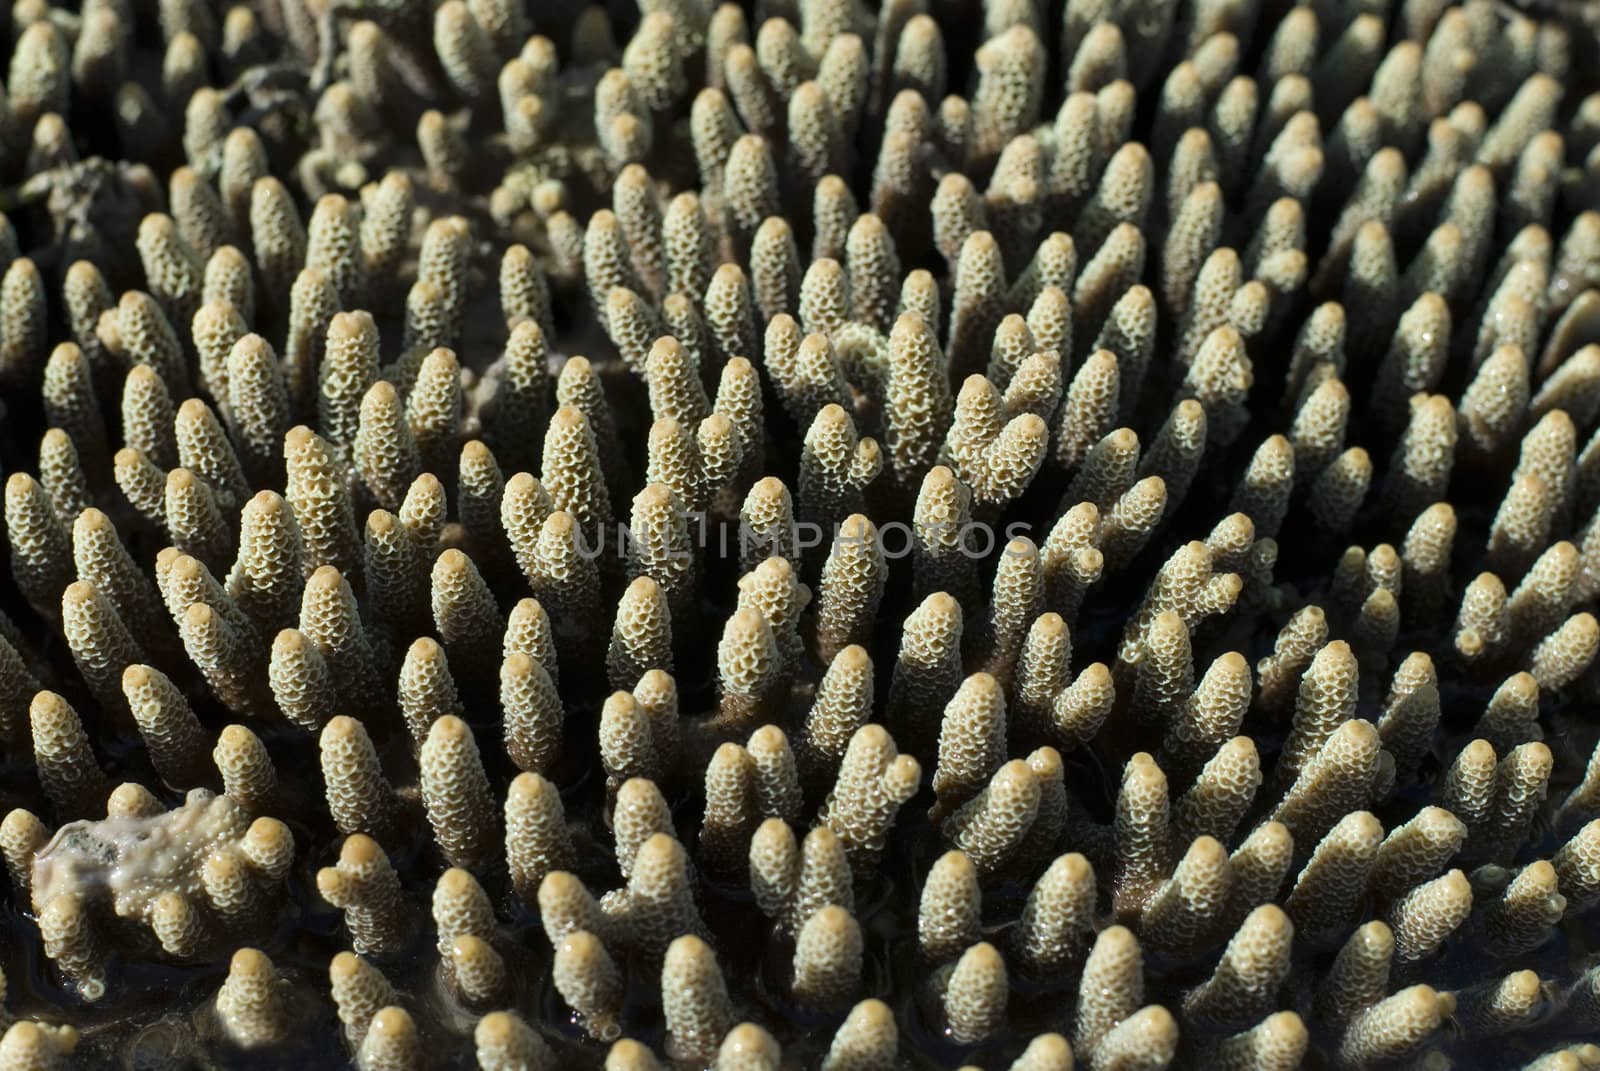 Acropora, one of many types of hard stony coral